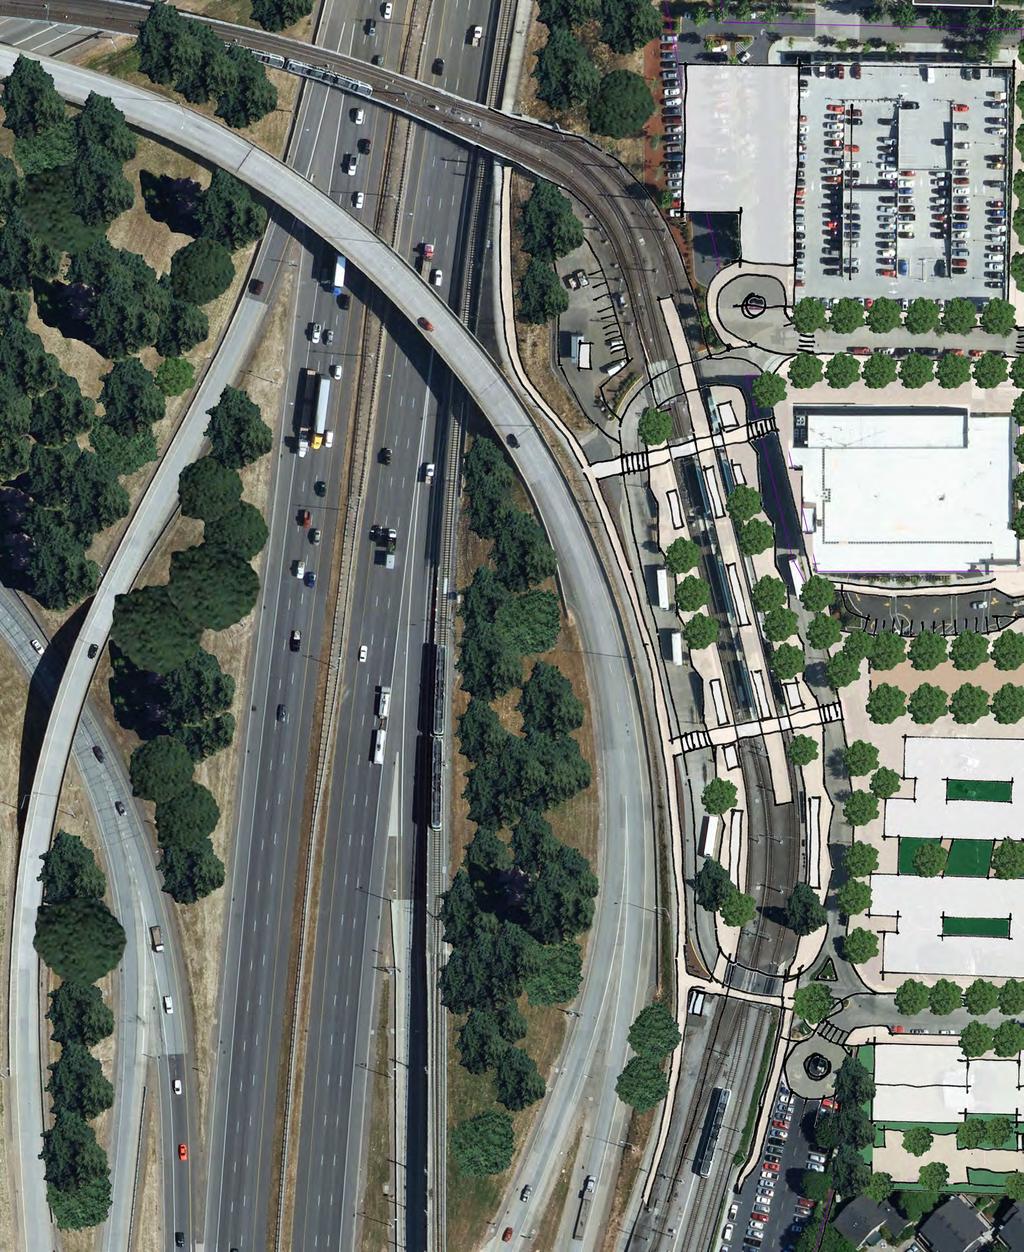 New comprehensive landscape plan for freeway interchange. Large firs would enhance and strengthen Gateway/ Rocky Butte identity, create symbolic eastern gateway to Portland.